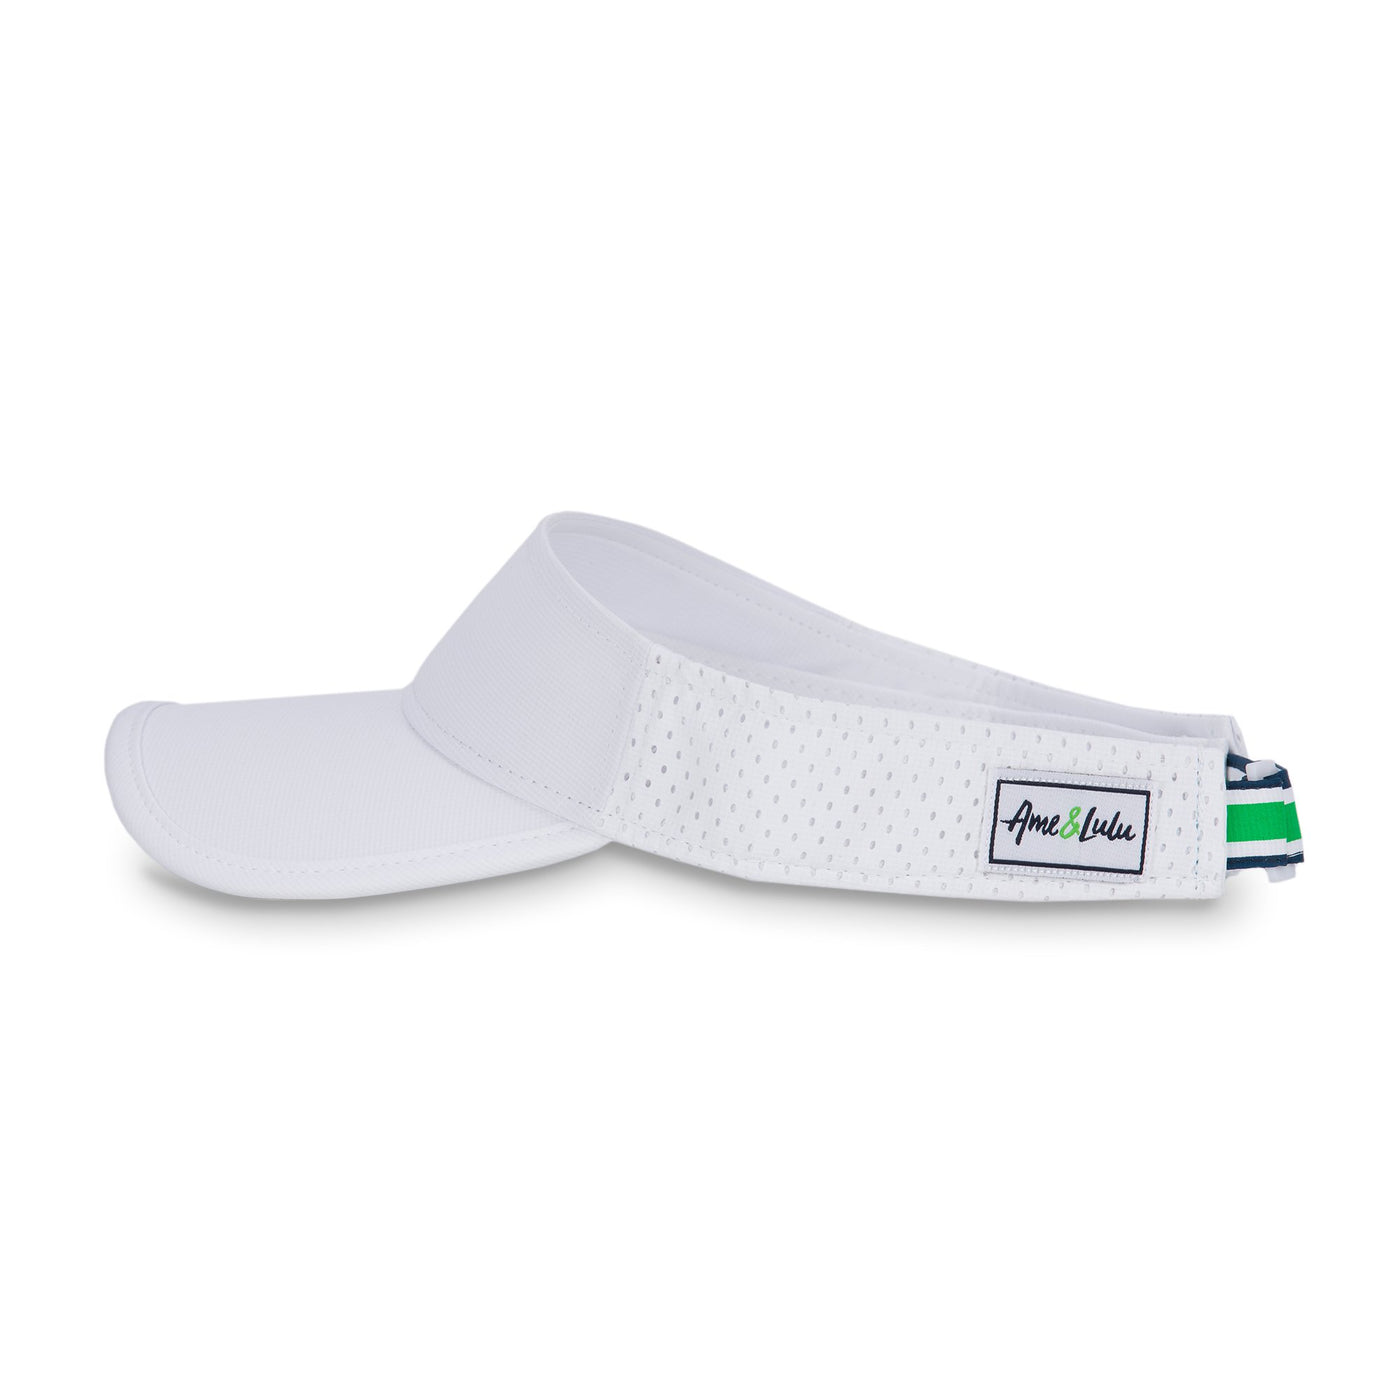 Side view of white visor with green and navy striped adjustable strap on the back.